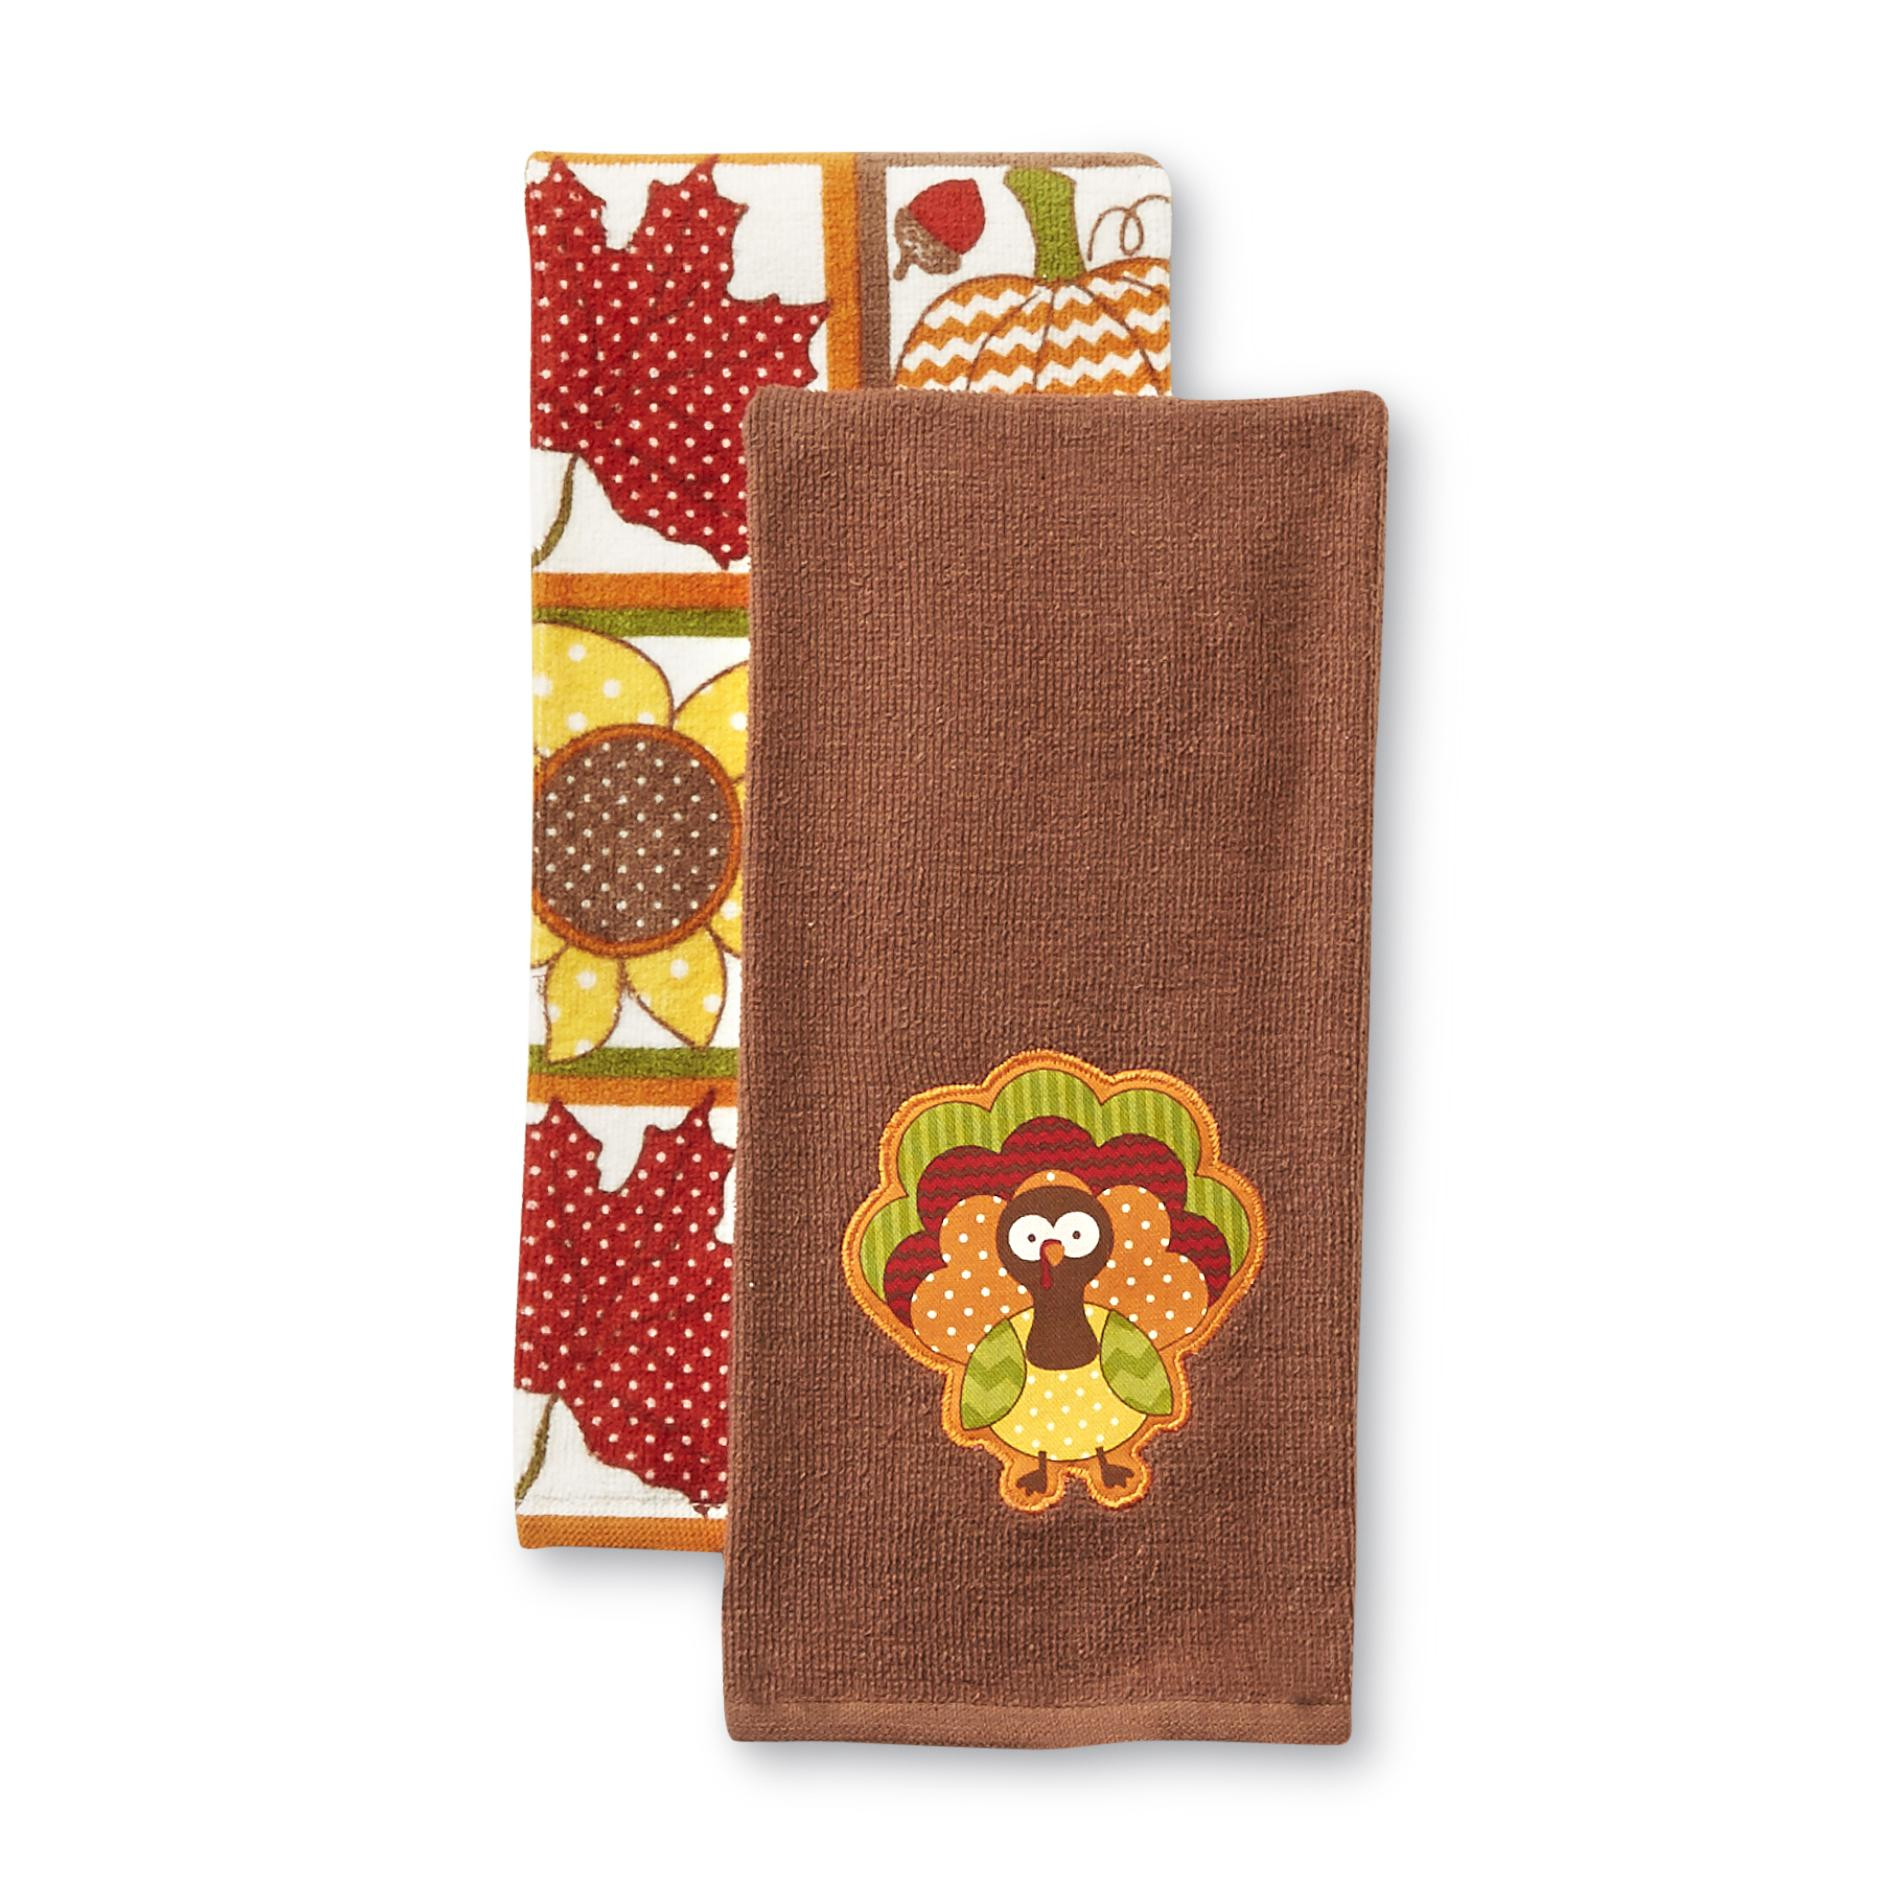 Thanksgiving Kitchen Towels
 Sandra by Sandra Lee 2 Pack Holiday Kitchen Towels